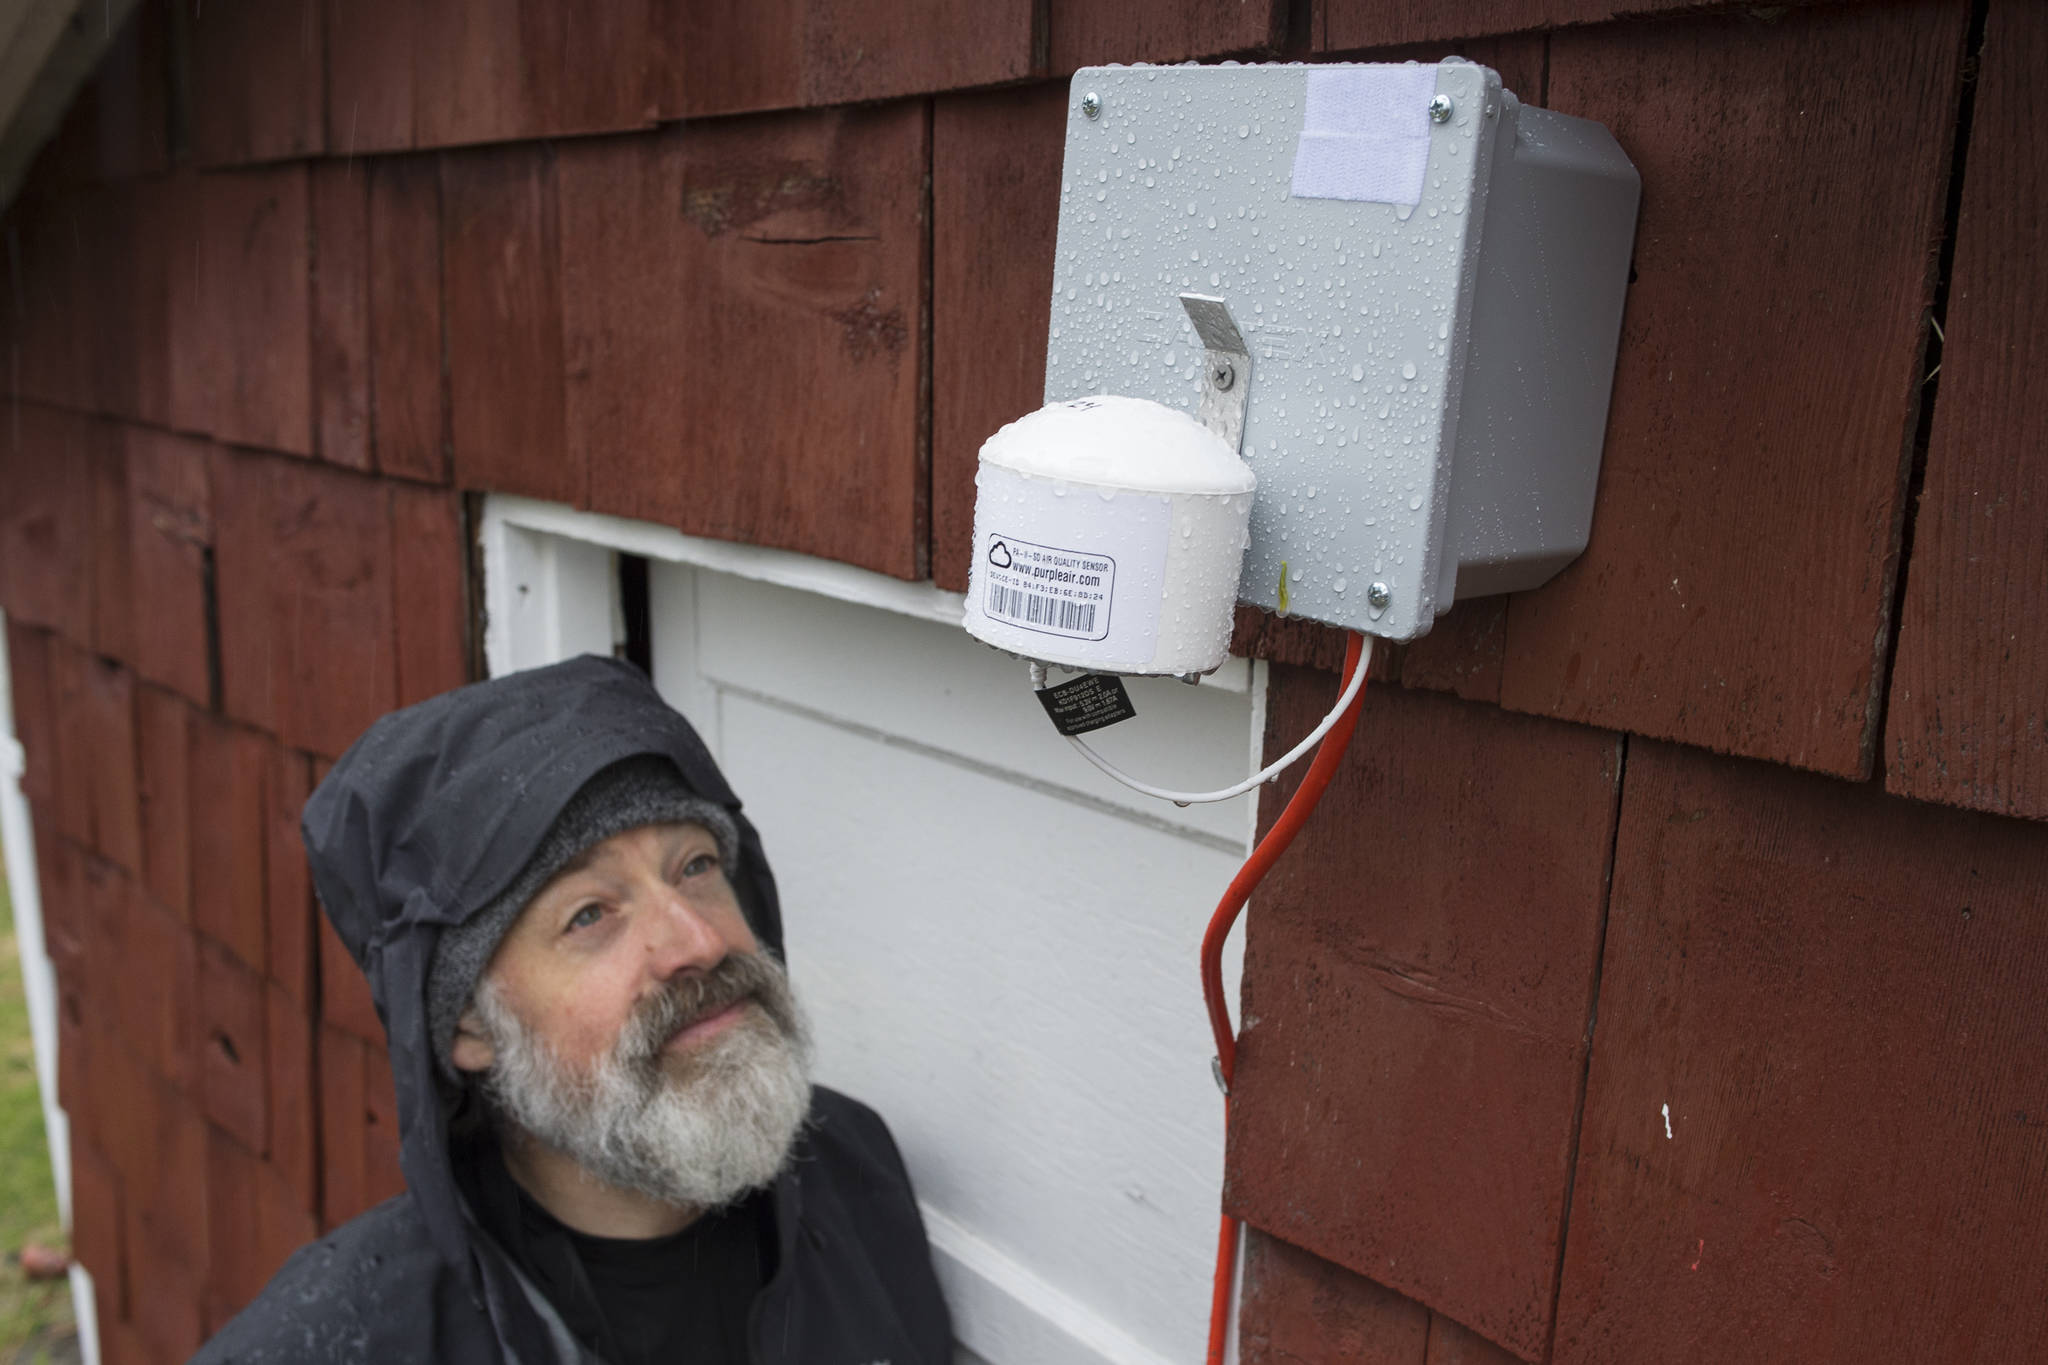 Mike Hekkers looks at an air quality measurement device that was installed by the Department of Environmental Conservation at his downtown home on Thursday, April 18, 2019. The device, along with a number of others, will measure air quality in downtown during this summer’s cruise ship season. (Michael Penn |Juneau Empire)